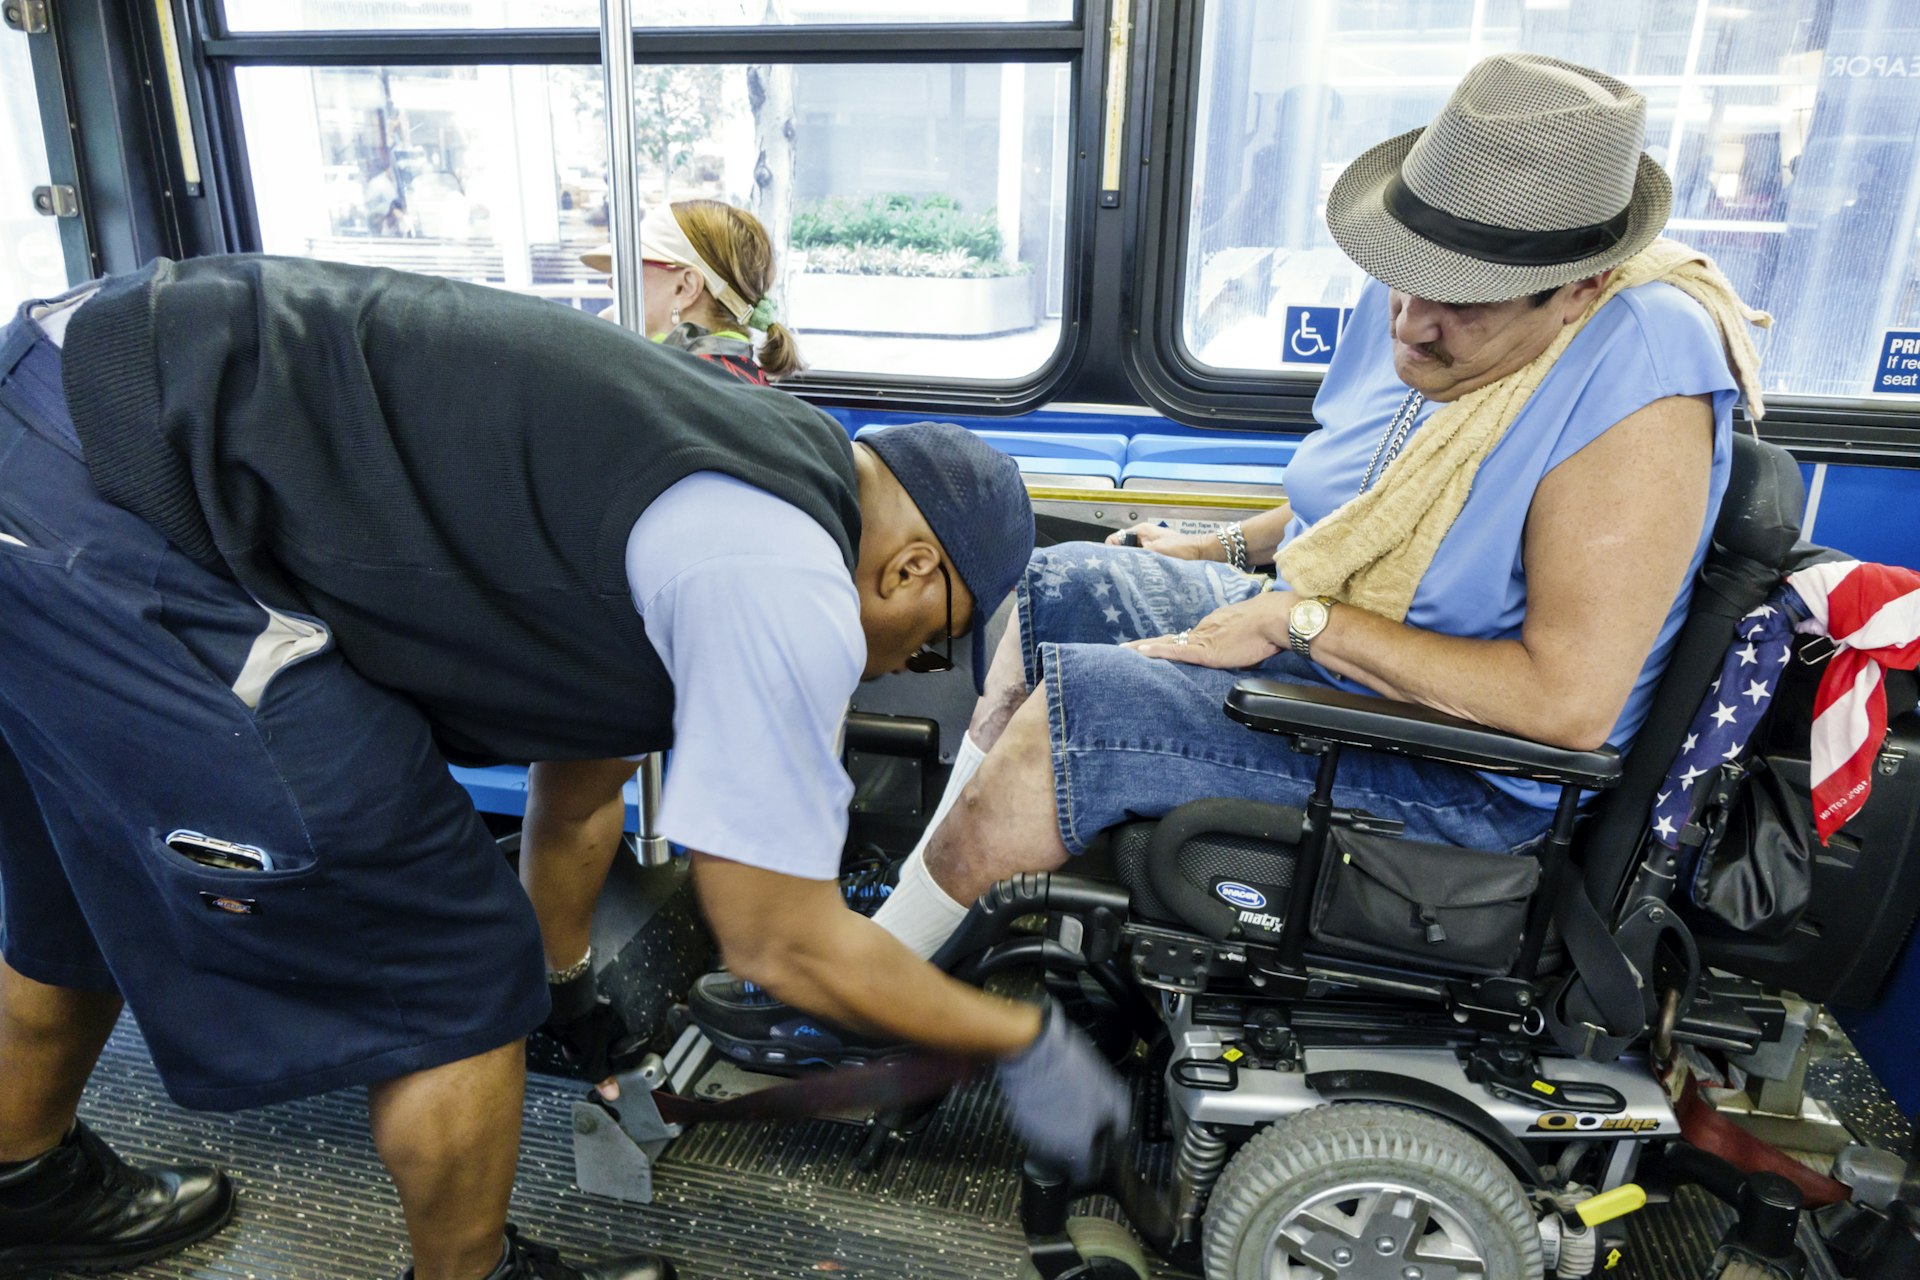 A driver helping a man in an electric wheelchair on a bus in Lower Manhattan.